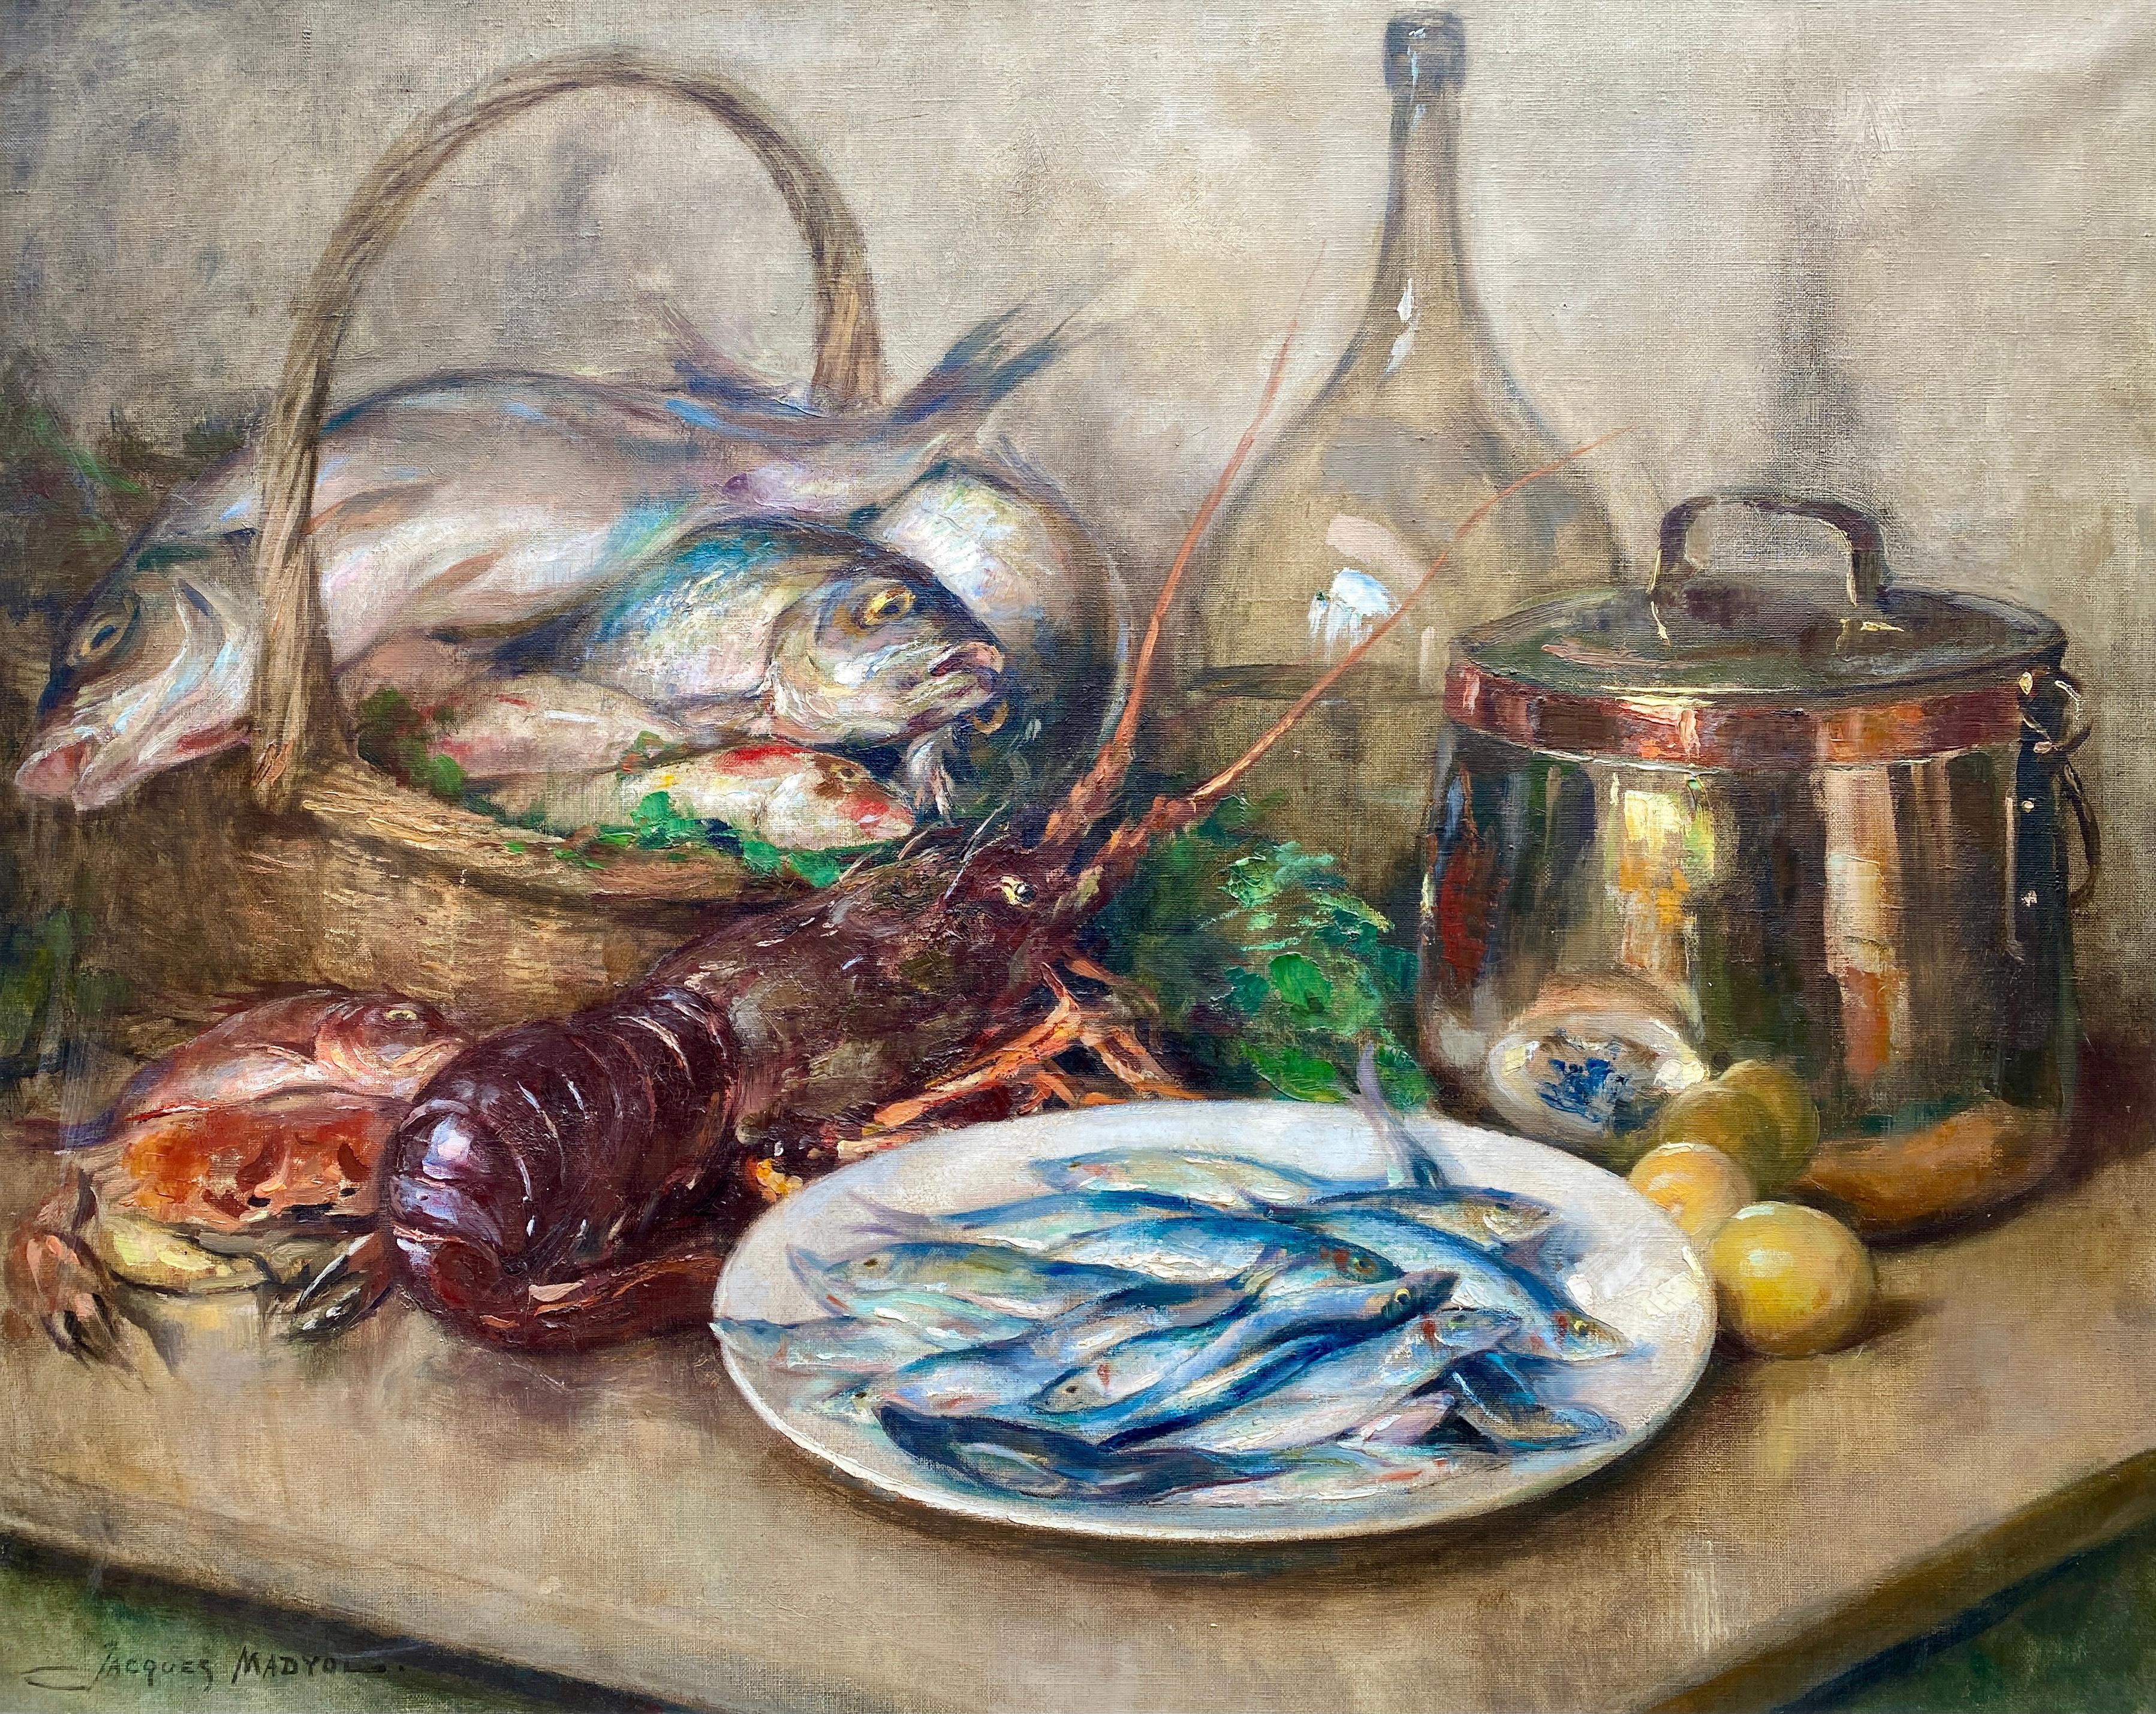 Still Life with Mediterranean Seafood, Jacques Madyol, Brussels 1871 – 1950 - Painting by Madyol Jacques